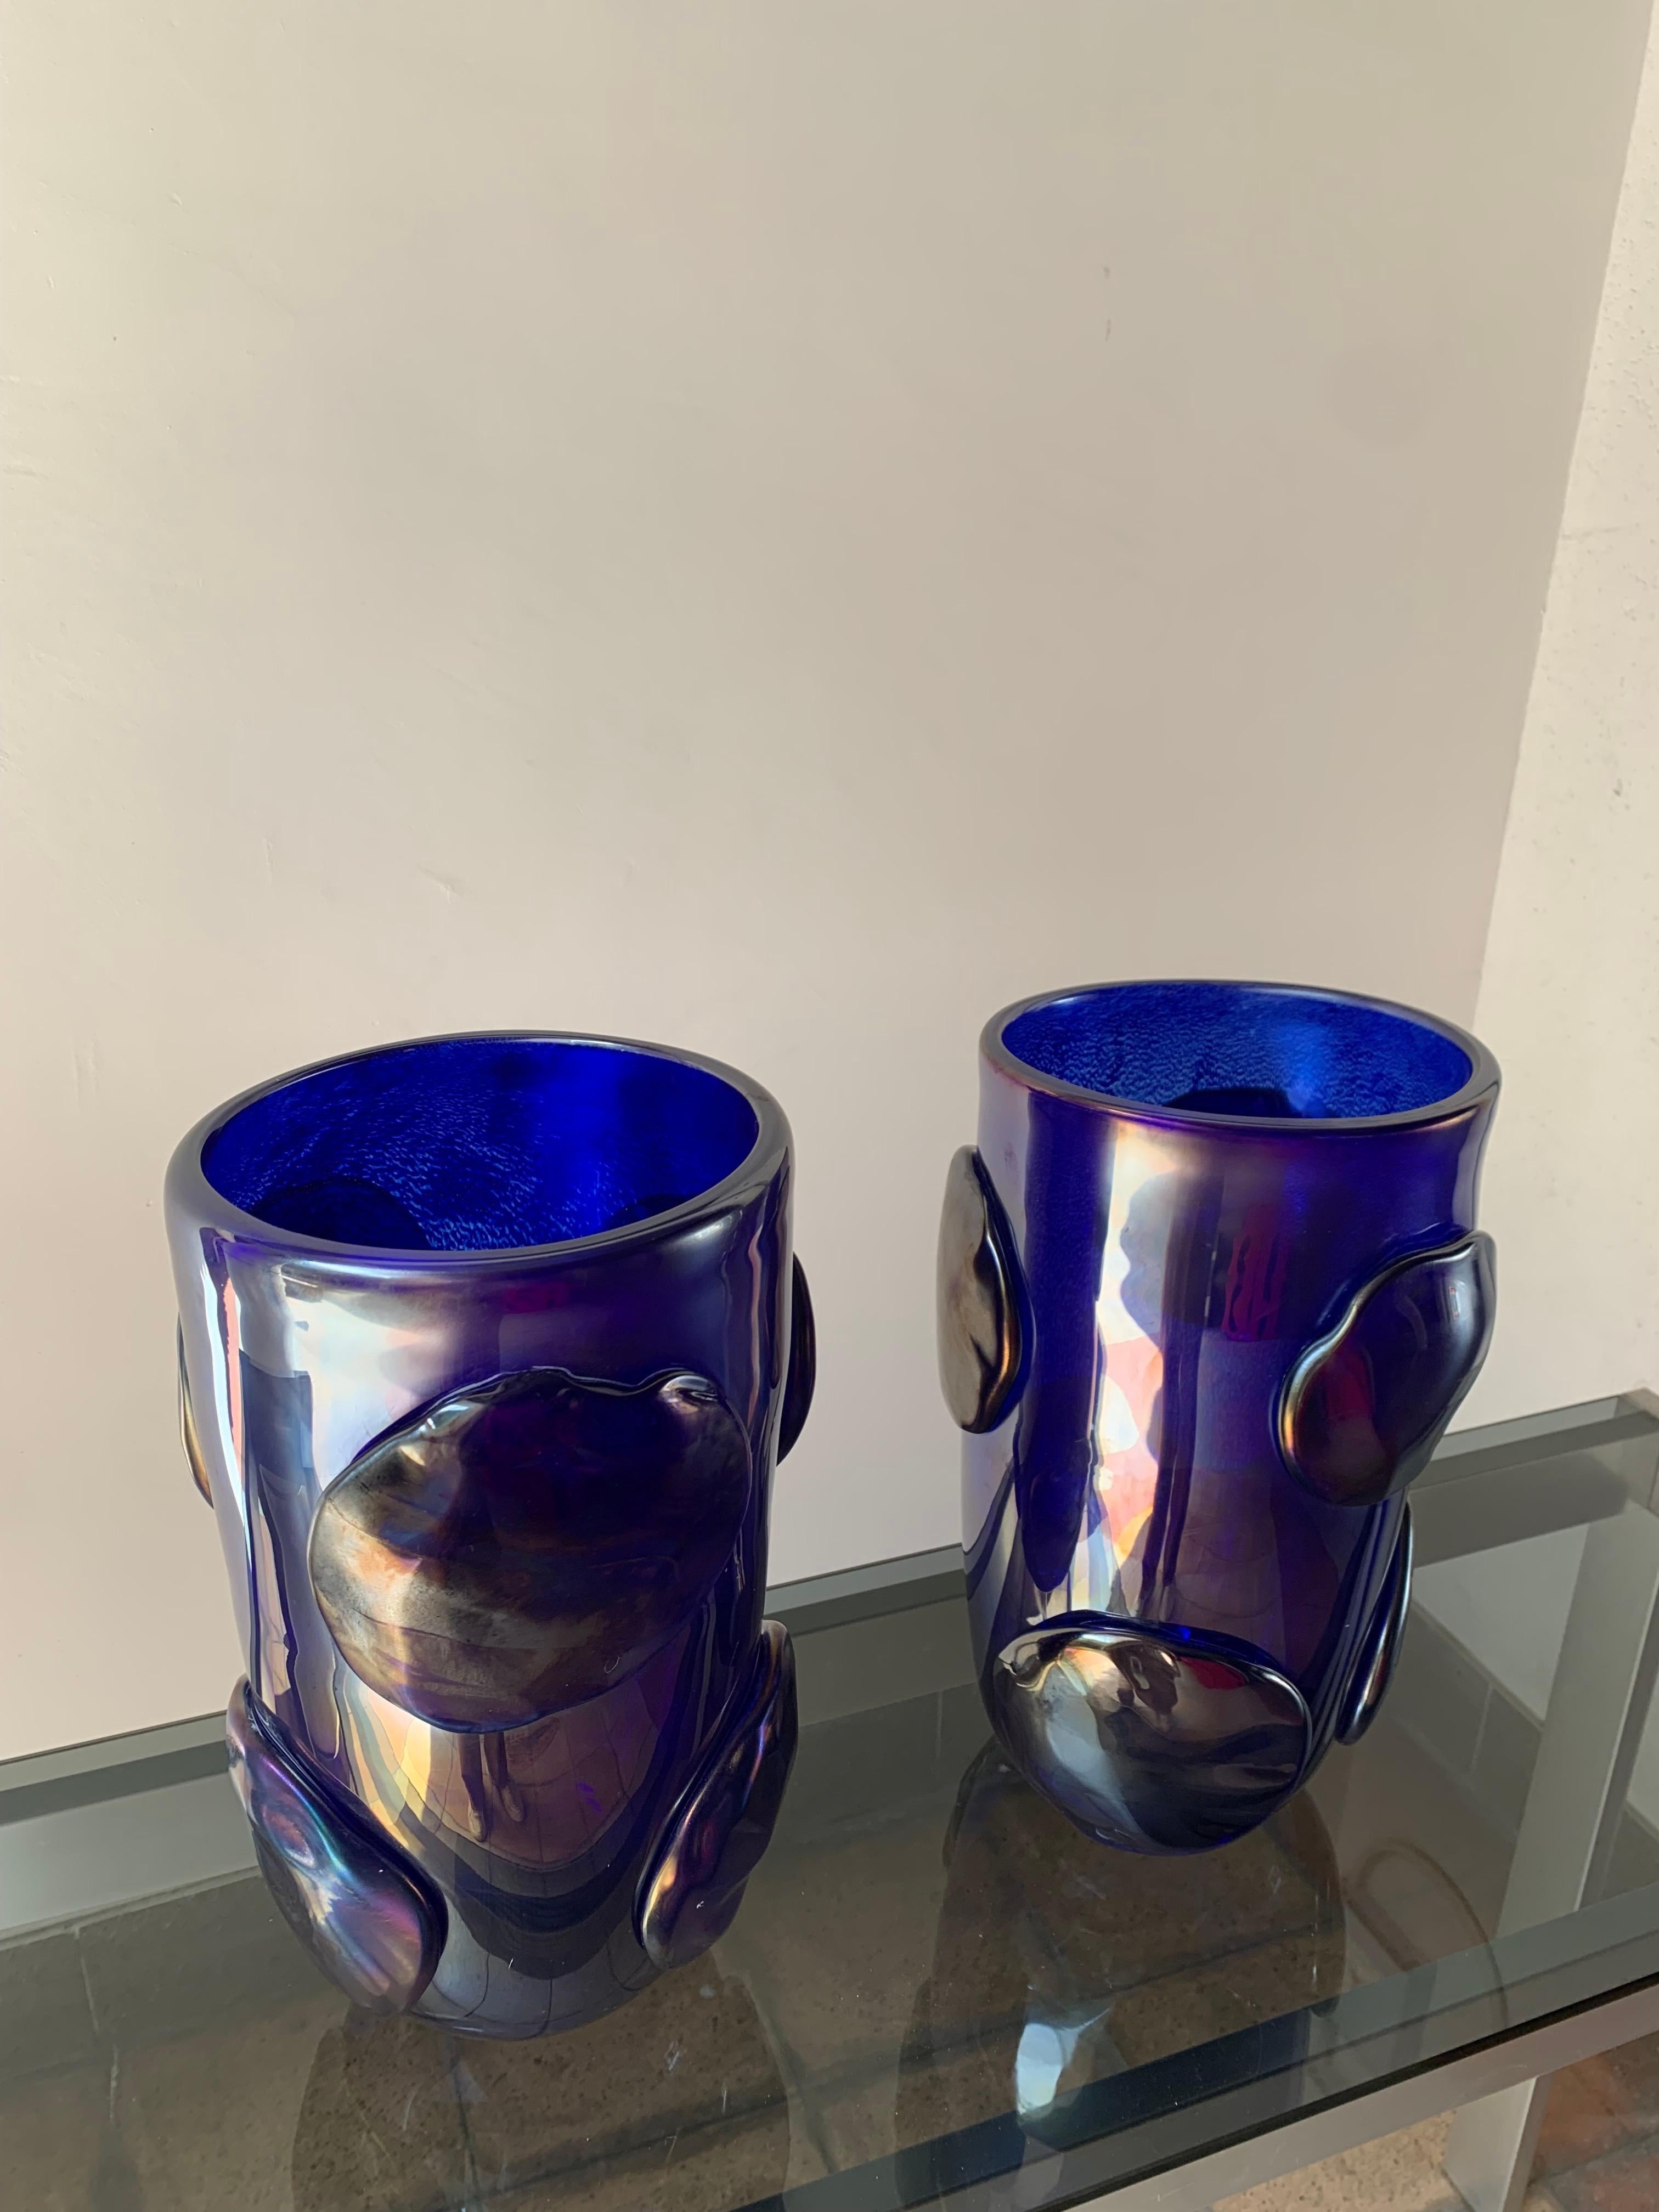 Pair of Vases with purple murano glass Pellets, 1990
Signed below the 